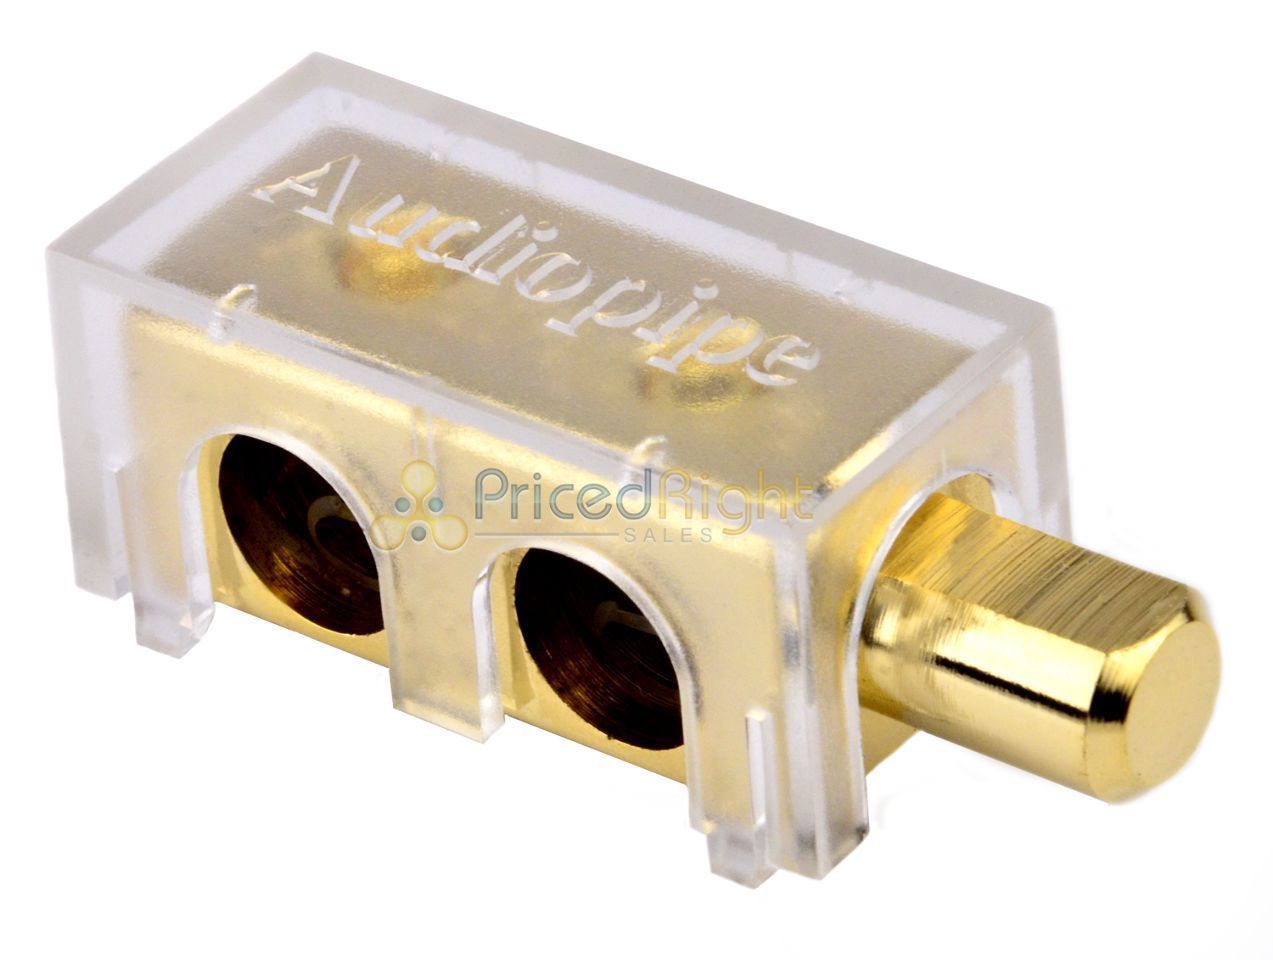 0 Gauge Amp Terminal Gold Plated Power Distribution Block Car Audio Dual Stereo